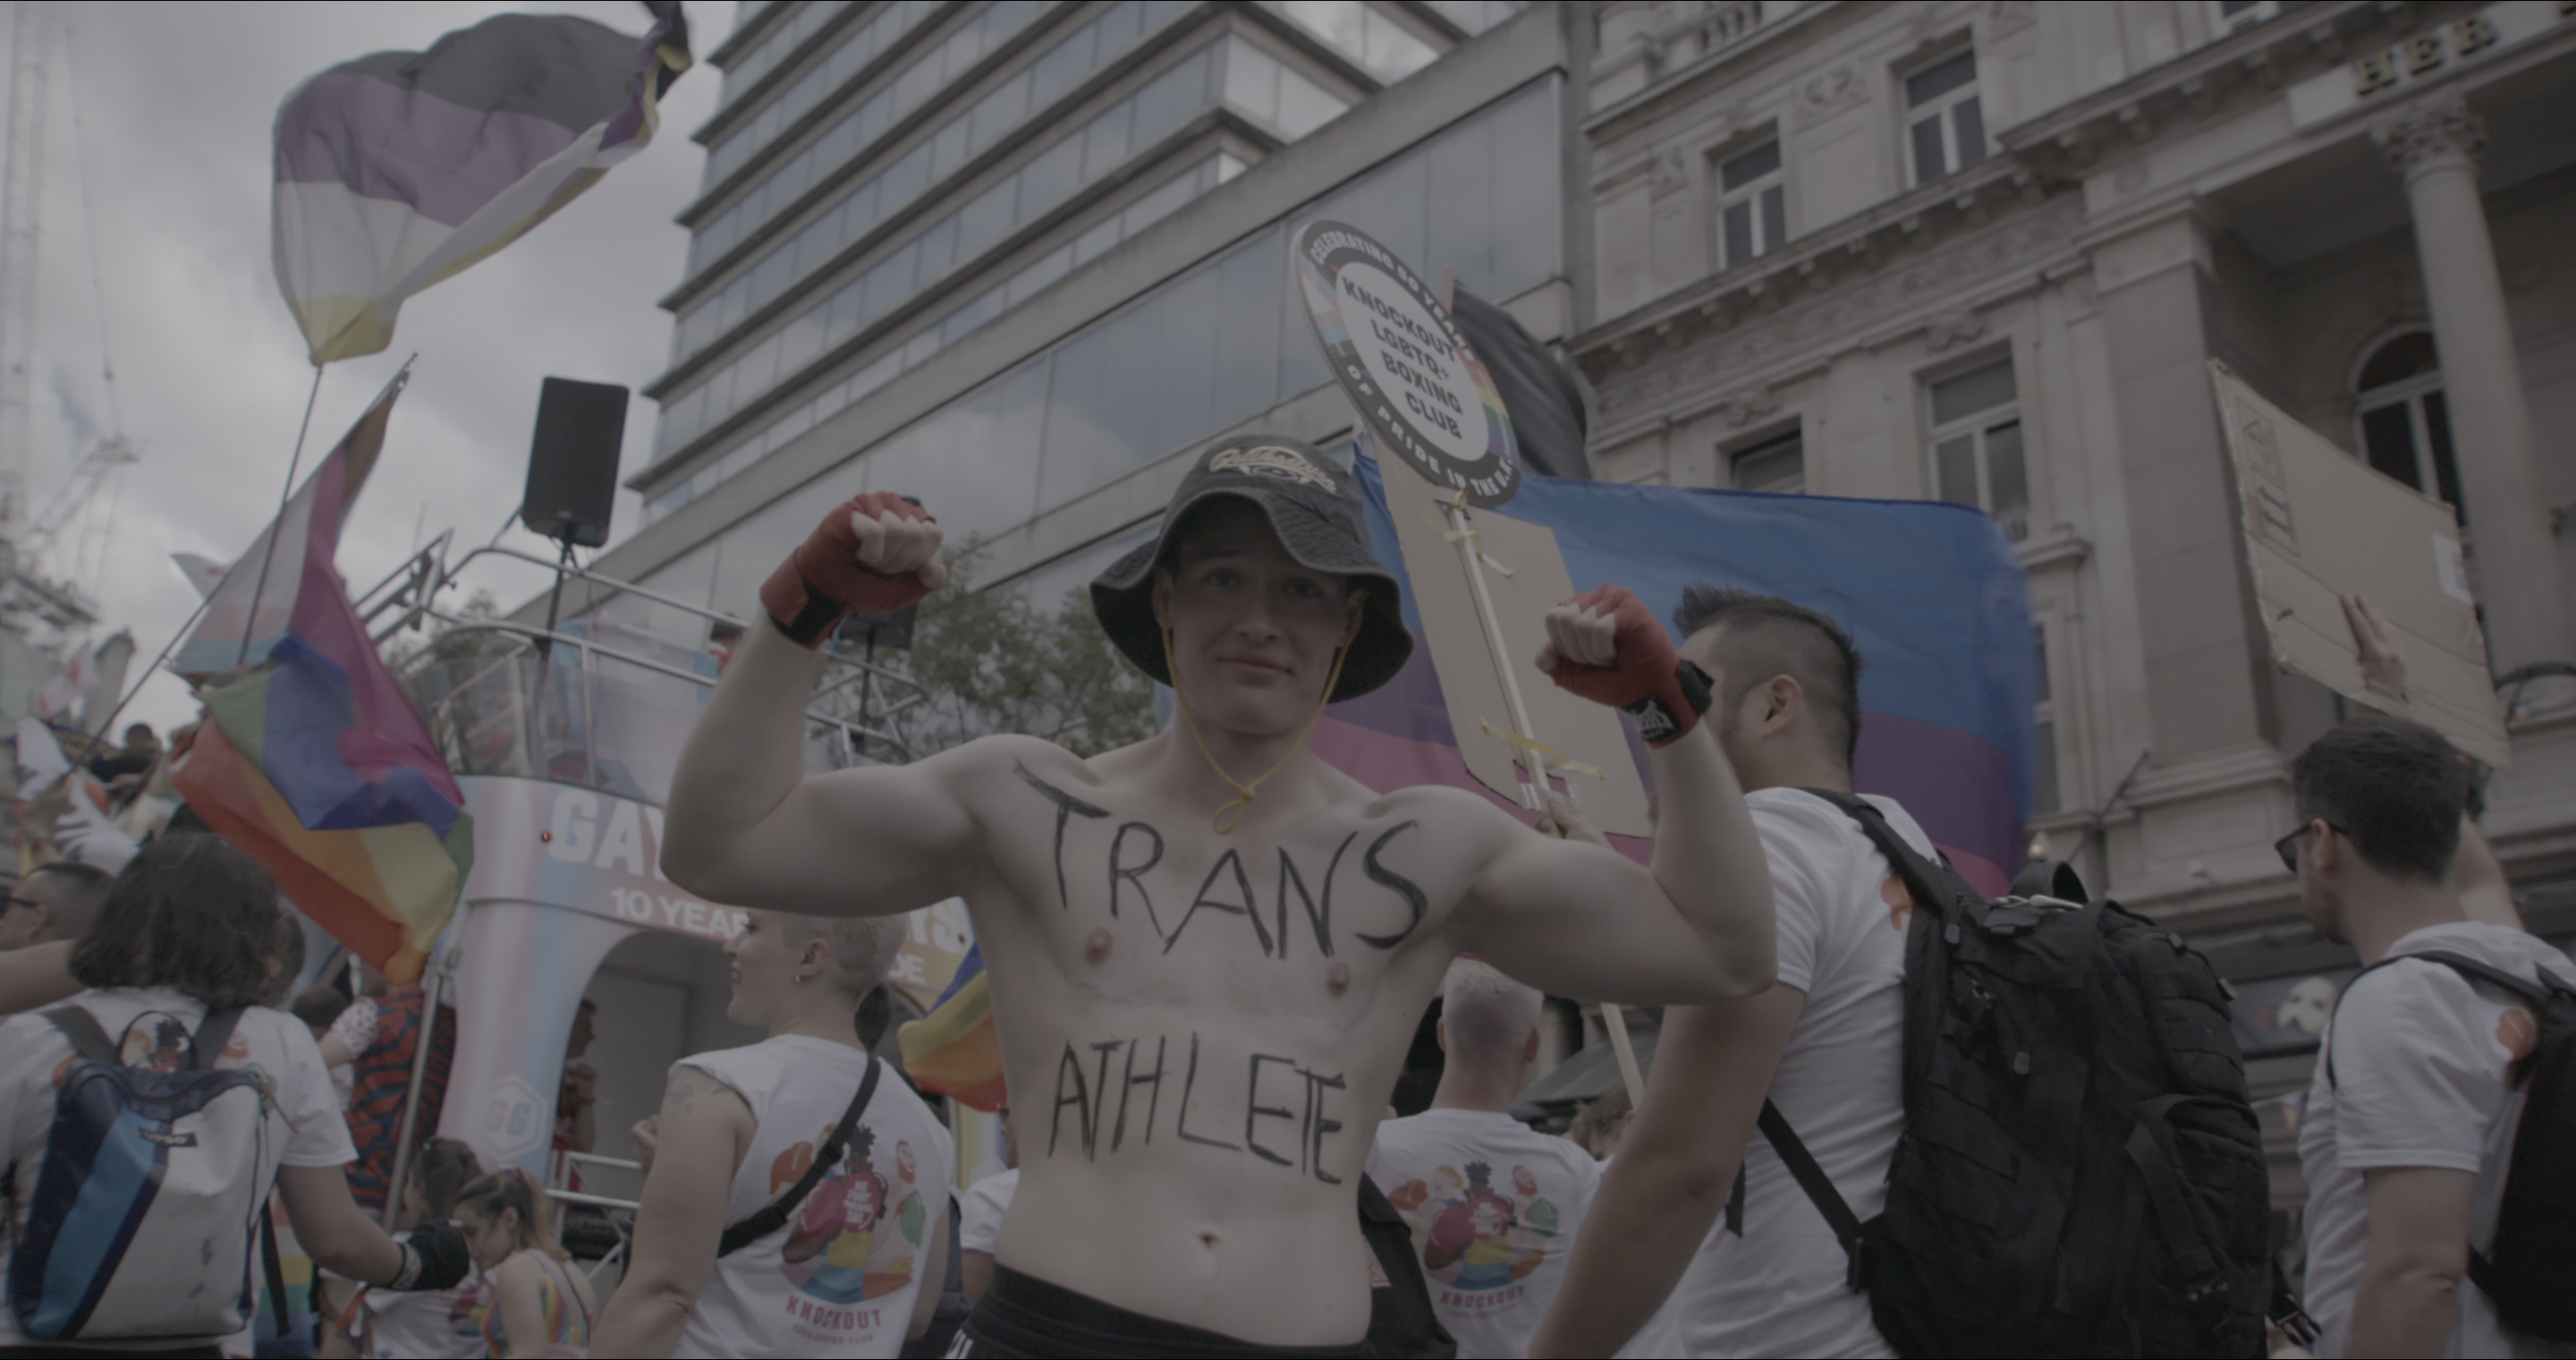 Jill faces the camera at Pride with arms flexed and the words "Trans Athlete" drawn onto his chest.